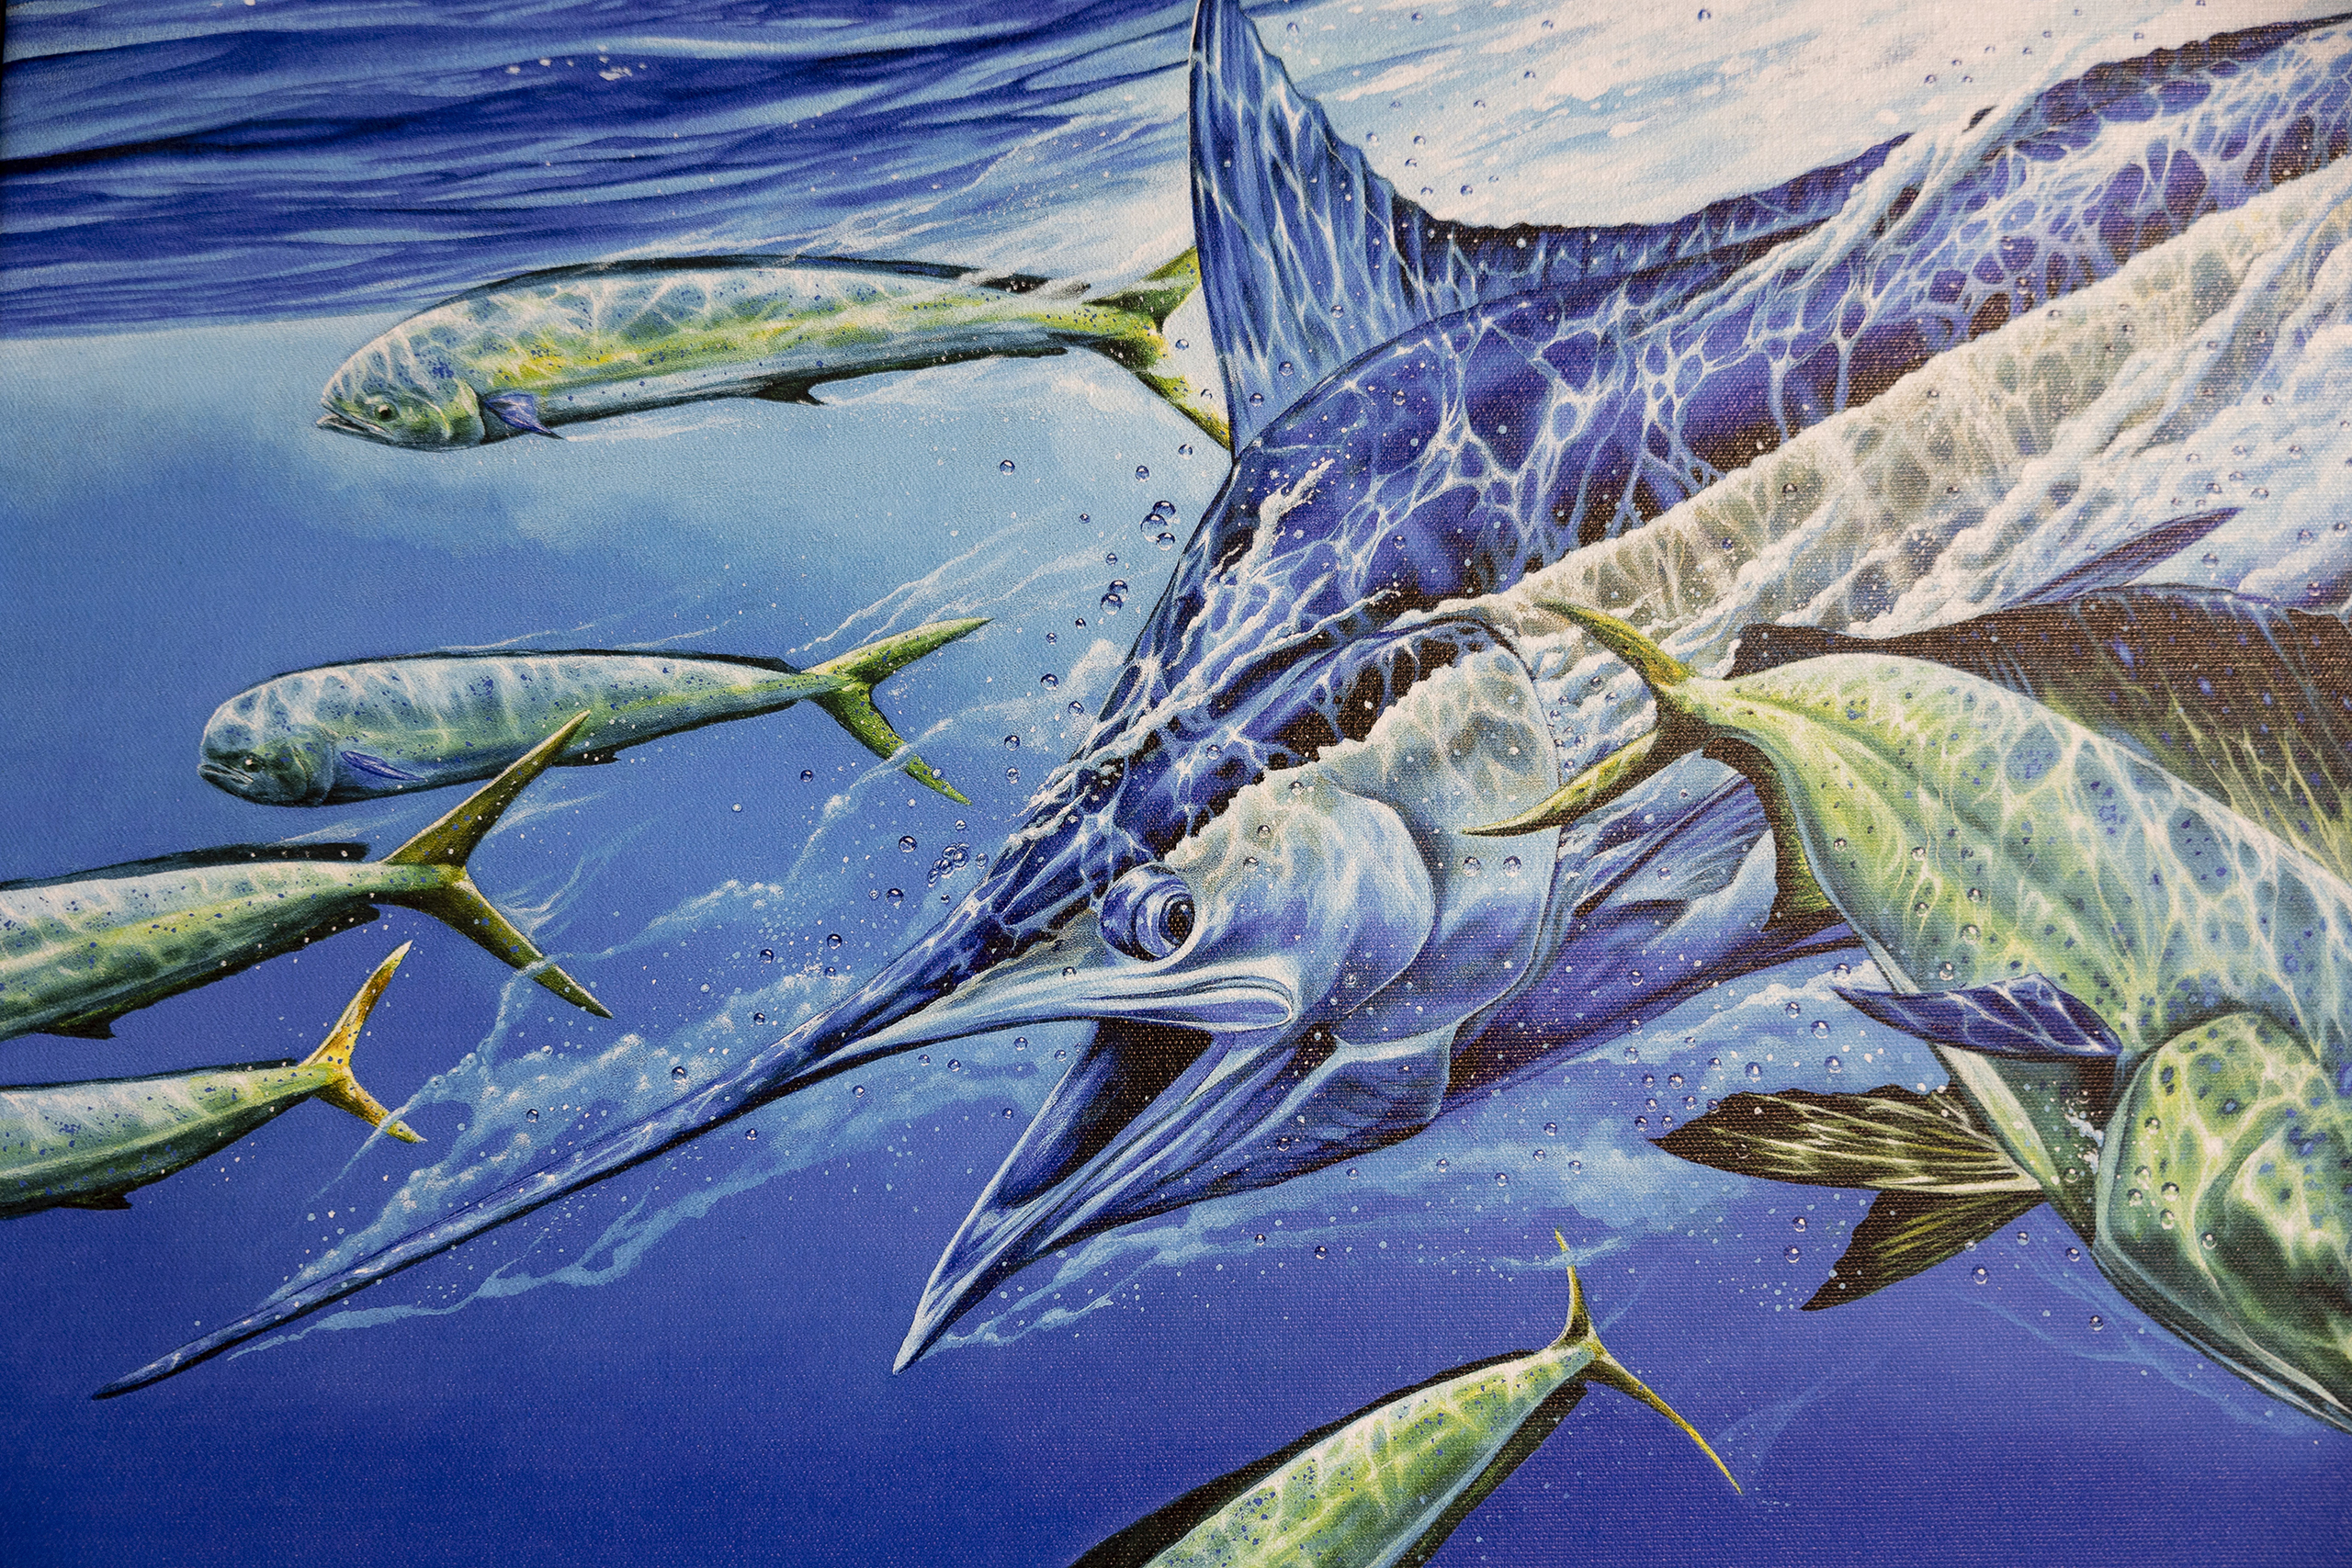 Painting of a marlin underwater, surrounded by smaller fish.